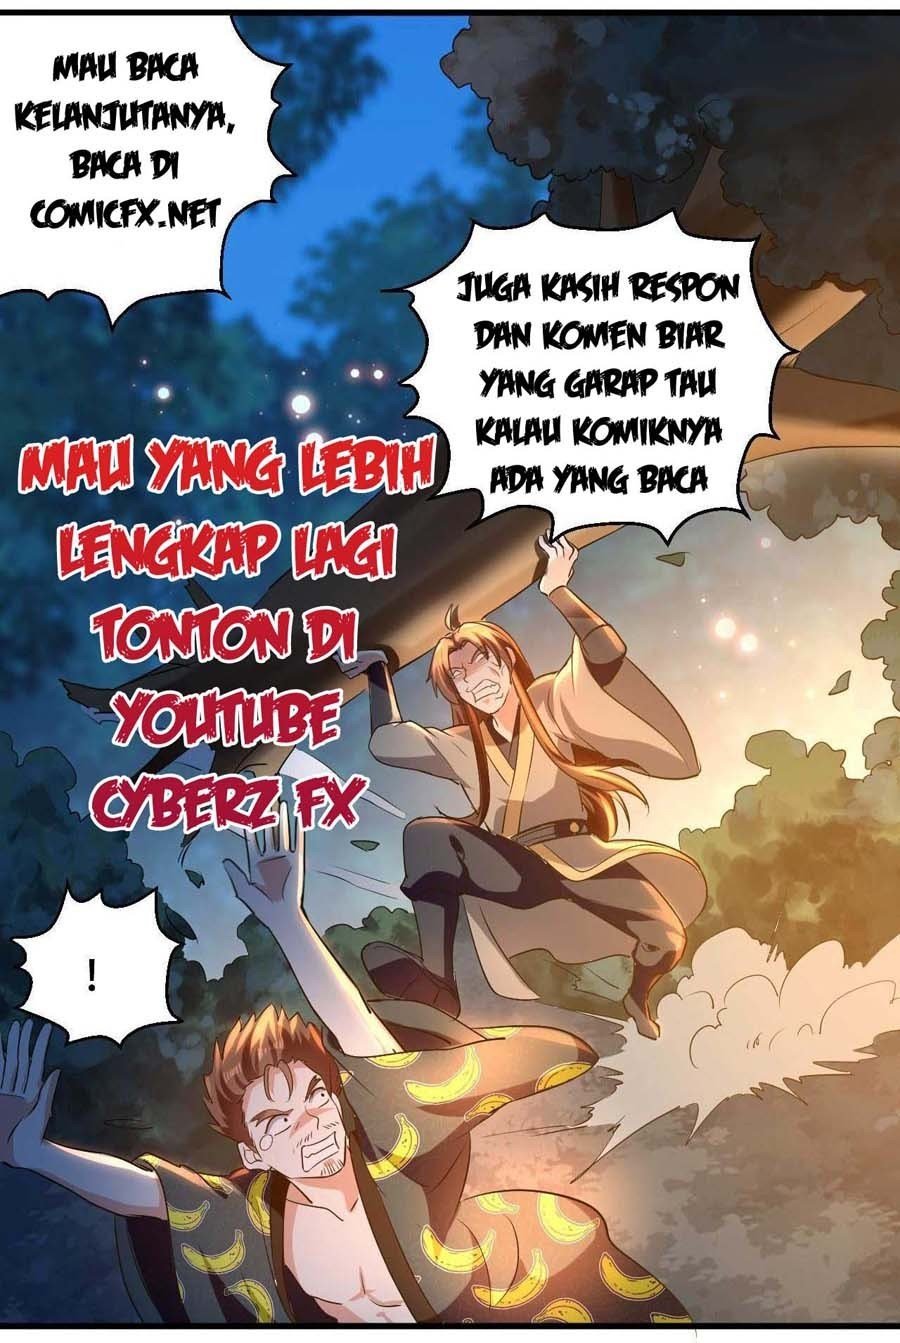 Outsider Super Son In Law Chapter 34